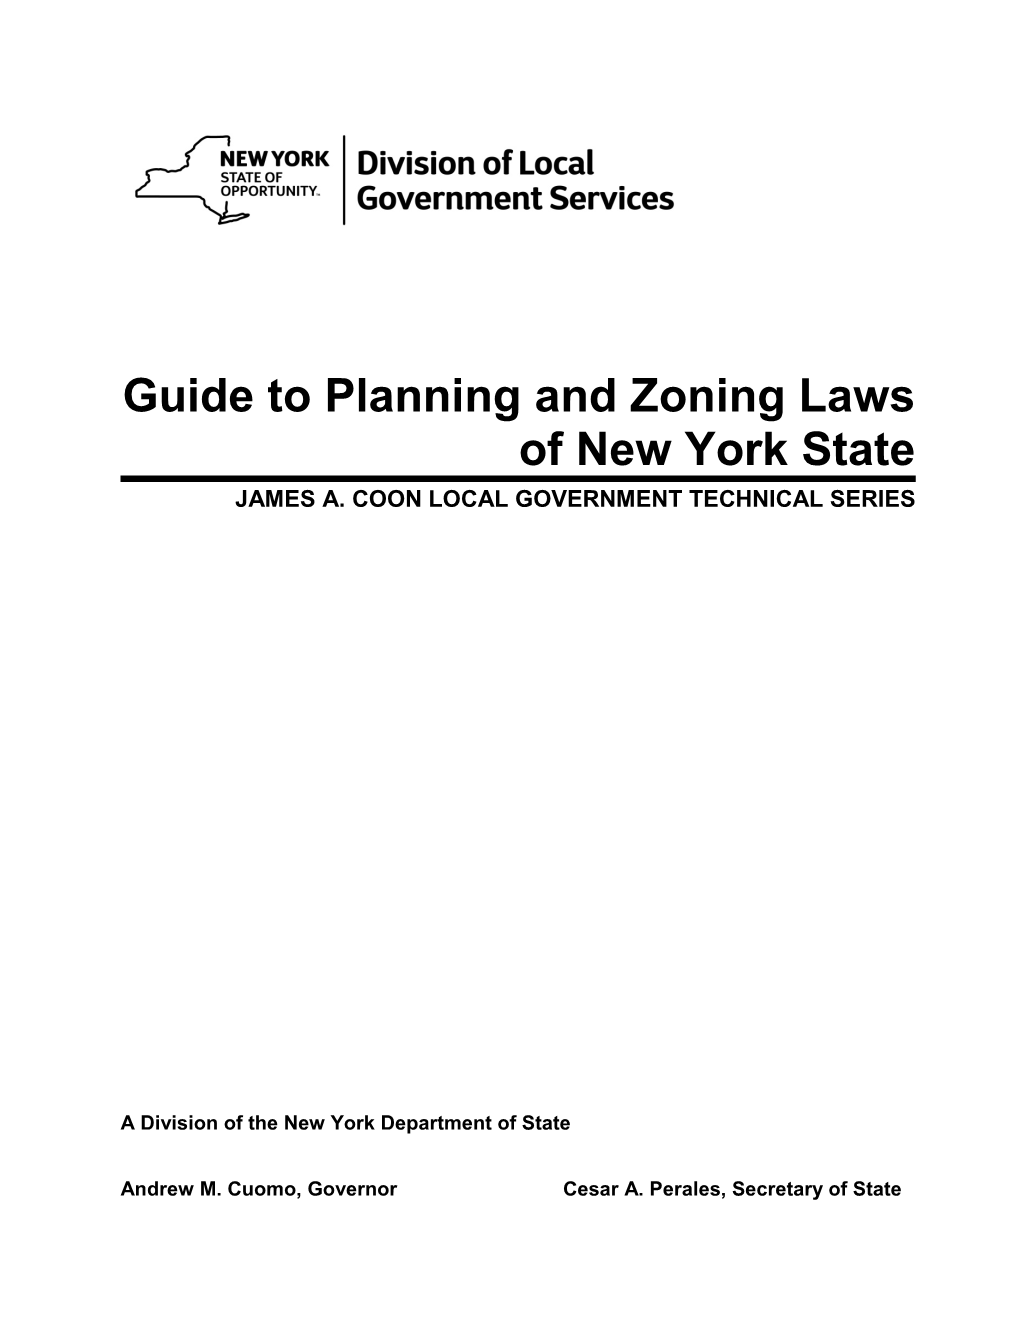 Guide to Planning and Zoning Laws of New York State JAMES A